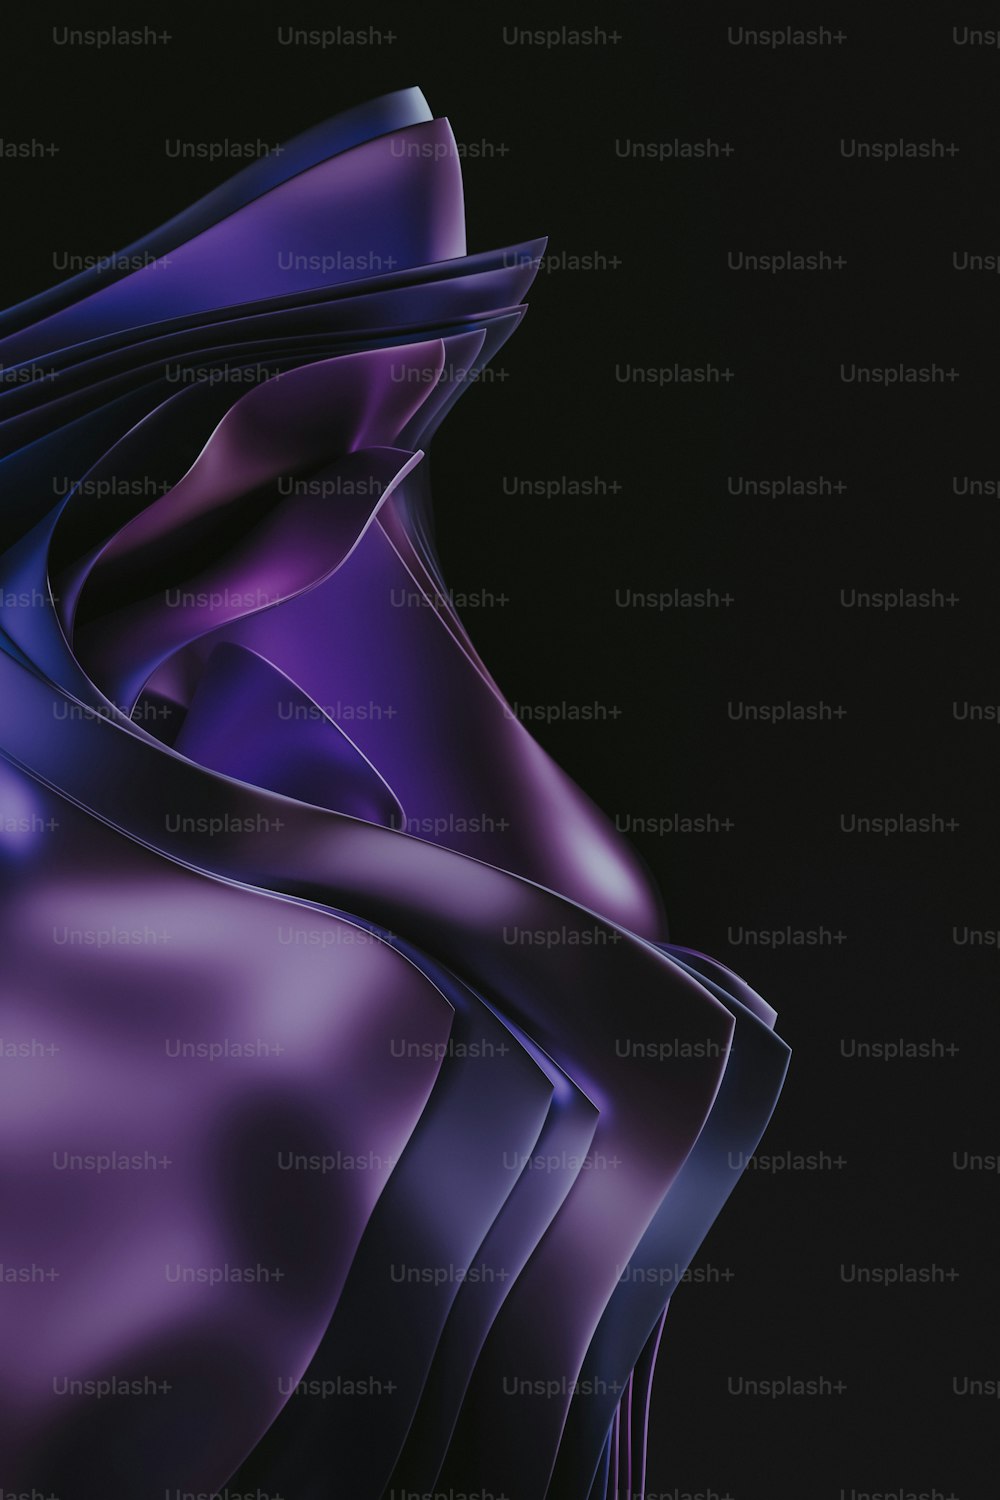 a purple abstract background with a black background